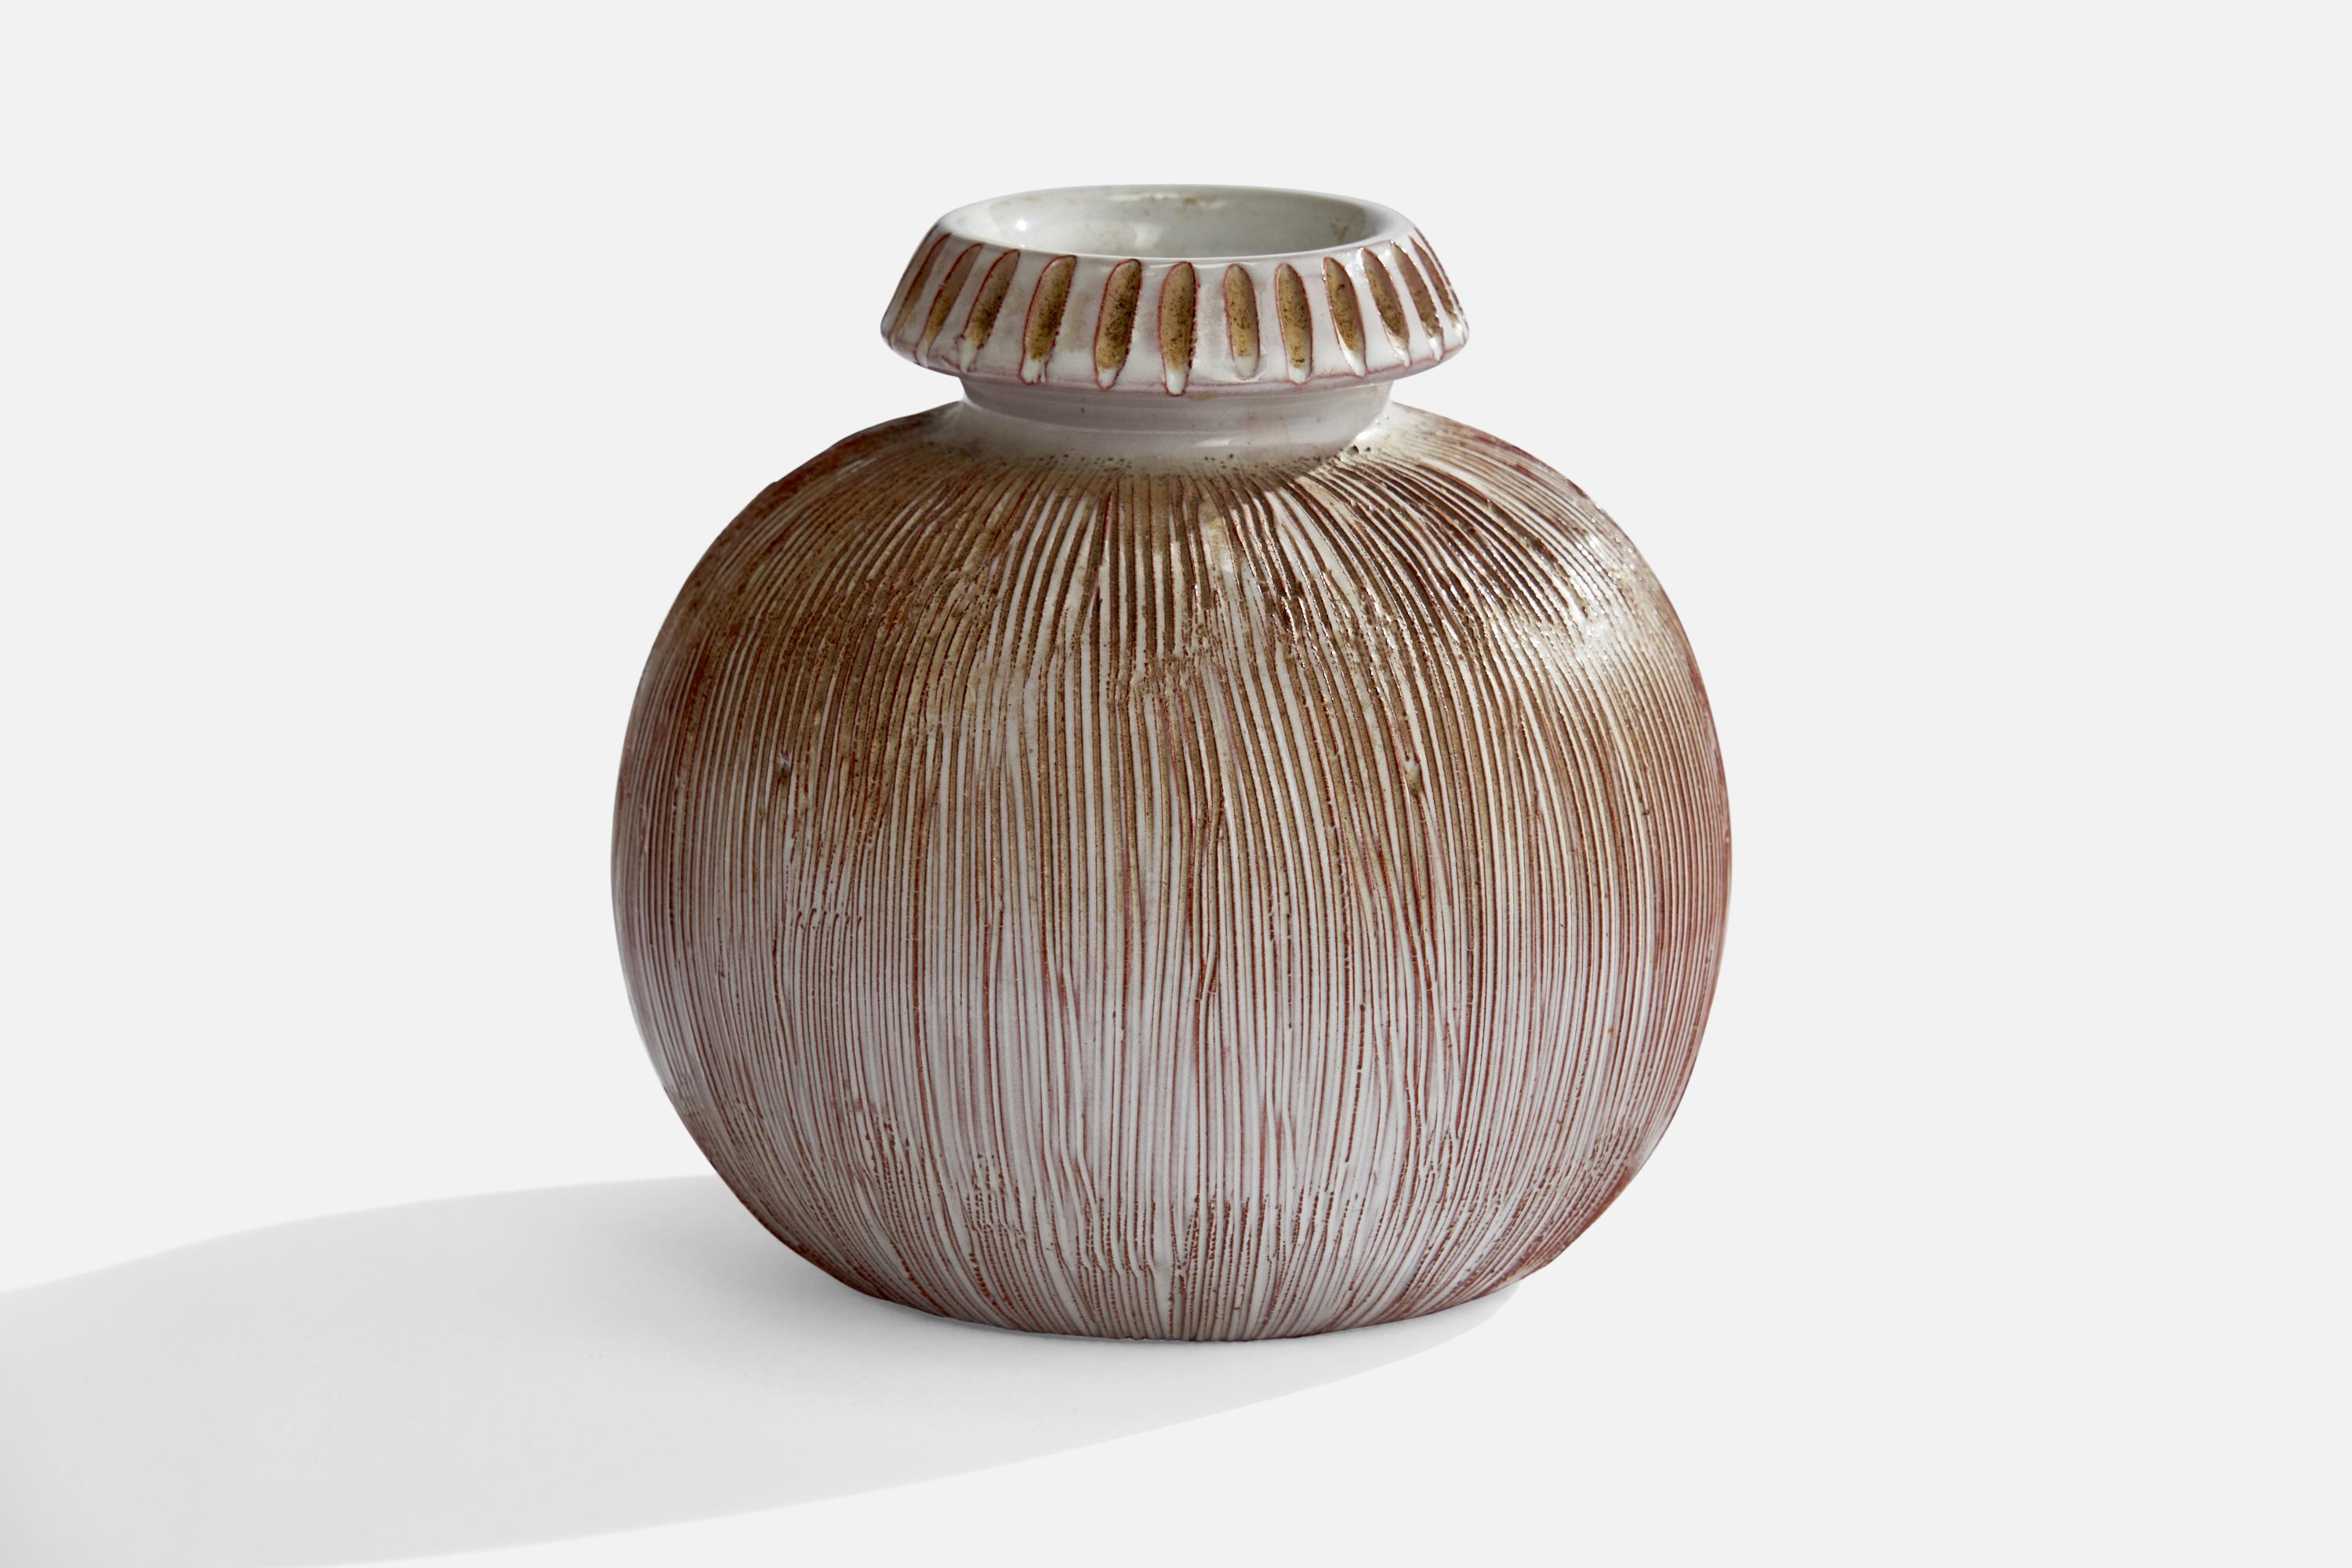 A white and brown-glazed incised vase designed and produced in Sweden, c. 1960s.